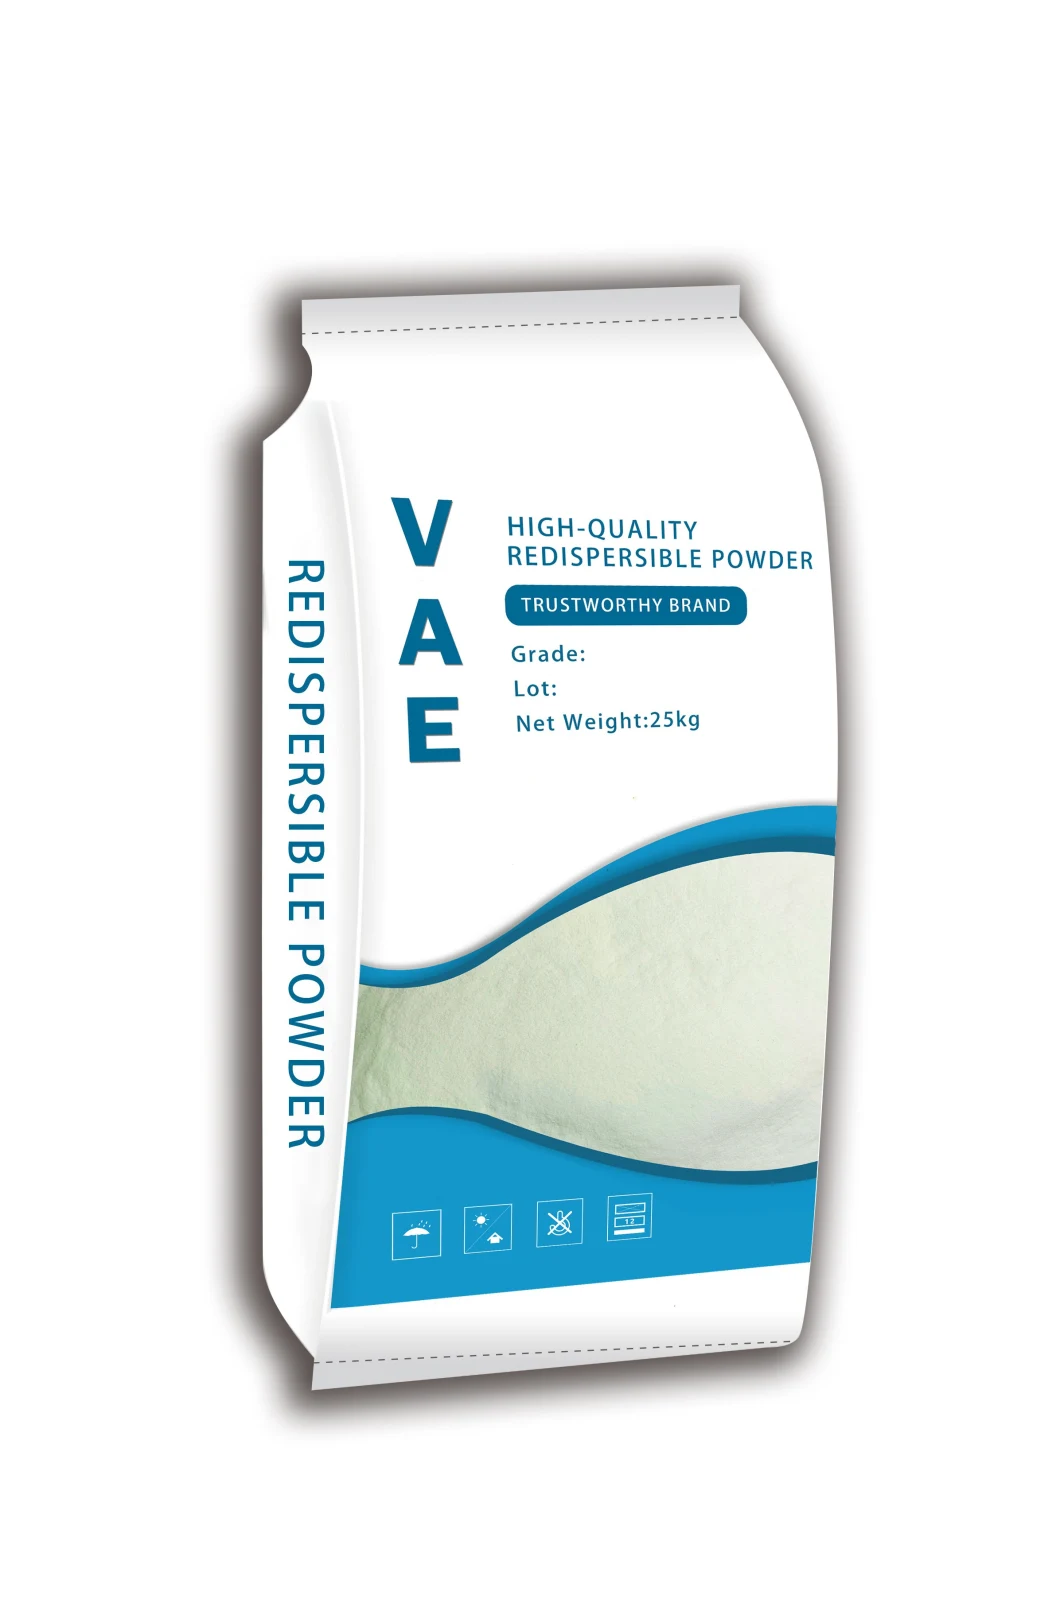 Non-Cement Based Dry Mixed Mortar Used Redispersible Latex Powder Vae Rdp